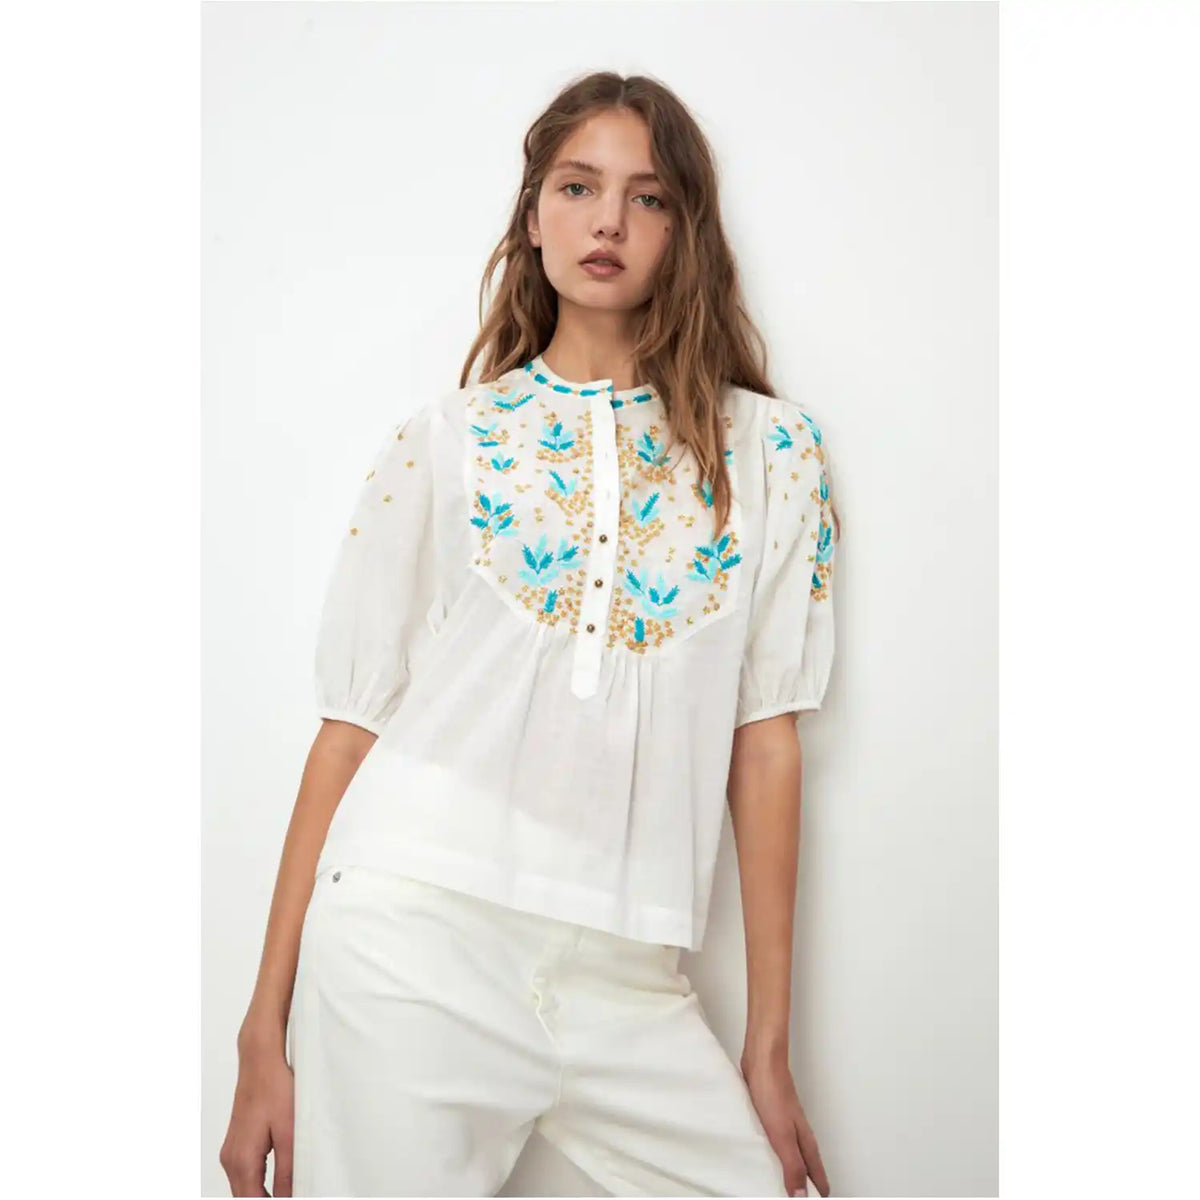 Embroidered-front Blouse - Blue and Gold Design